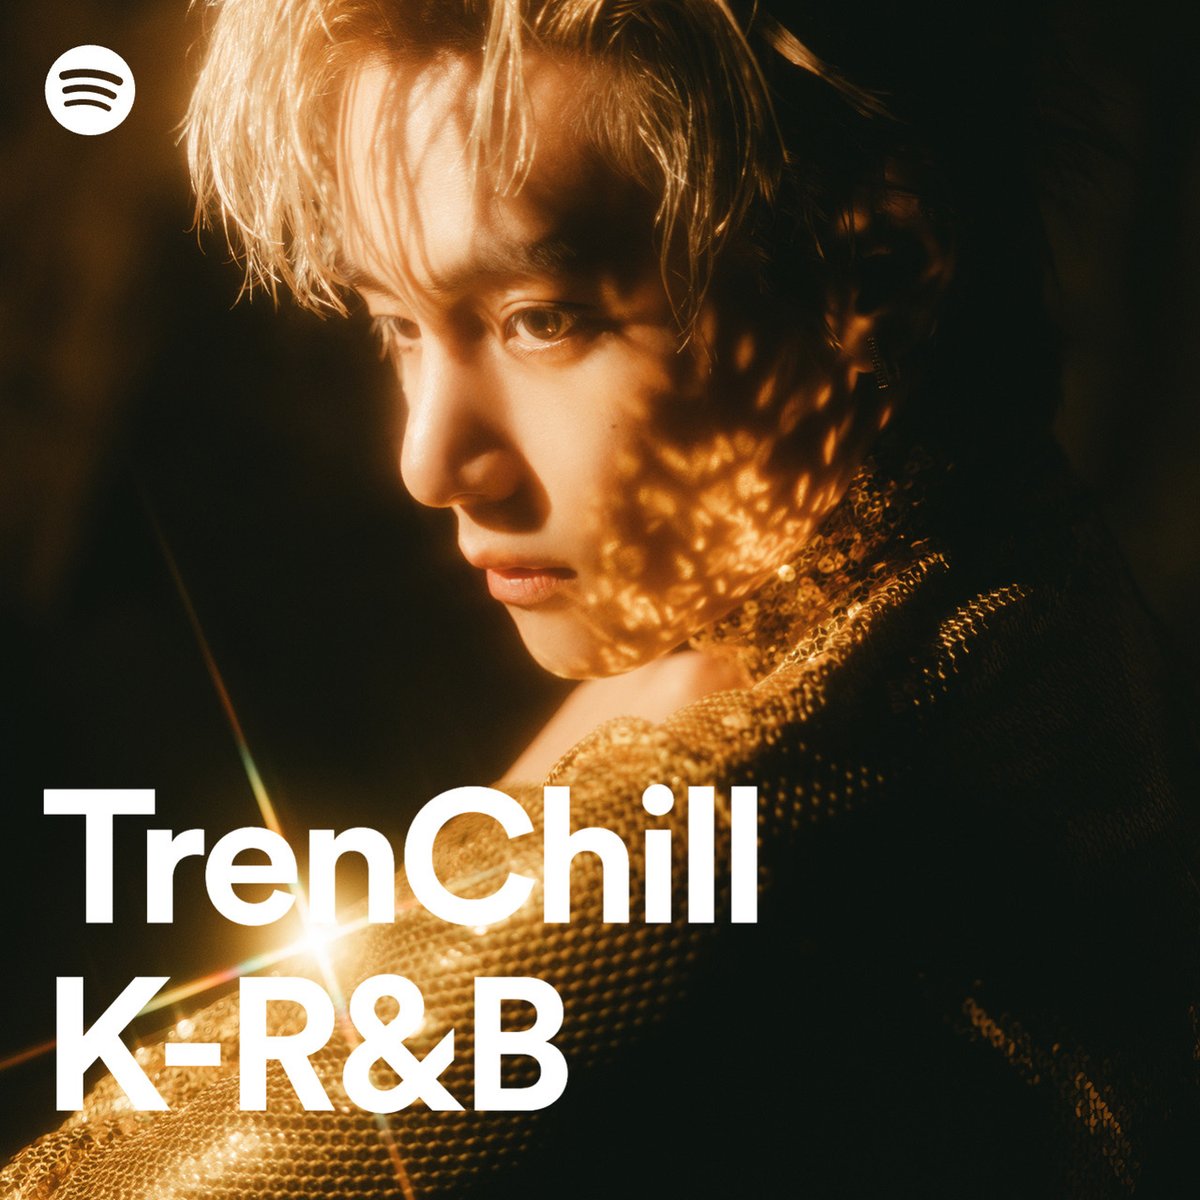 Listen to 'Love Me Again' on 'New Pop Picks' and 'TrenChill K-R&B' @spotify! 🎧 open.spotify.com/playlist/37i9d… 🎧 open.spotify.com/playlist/37i9d… #V #뷔 #V_Layover